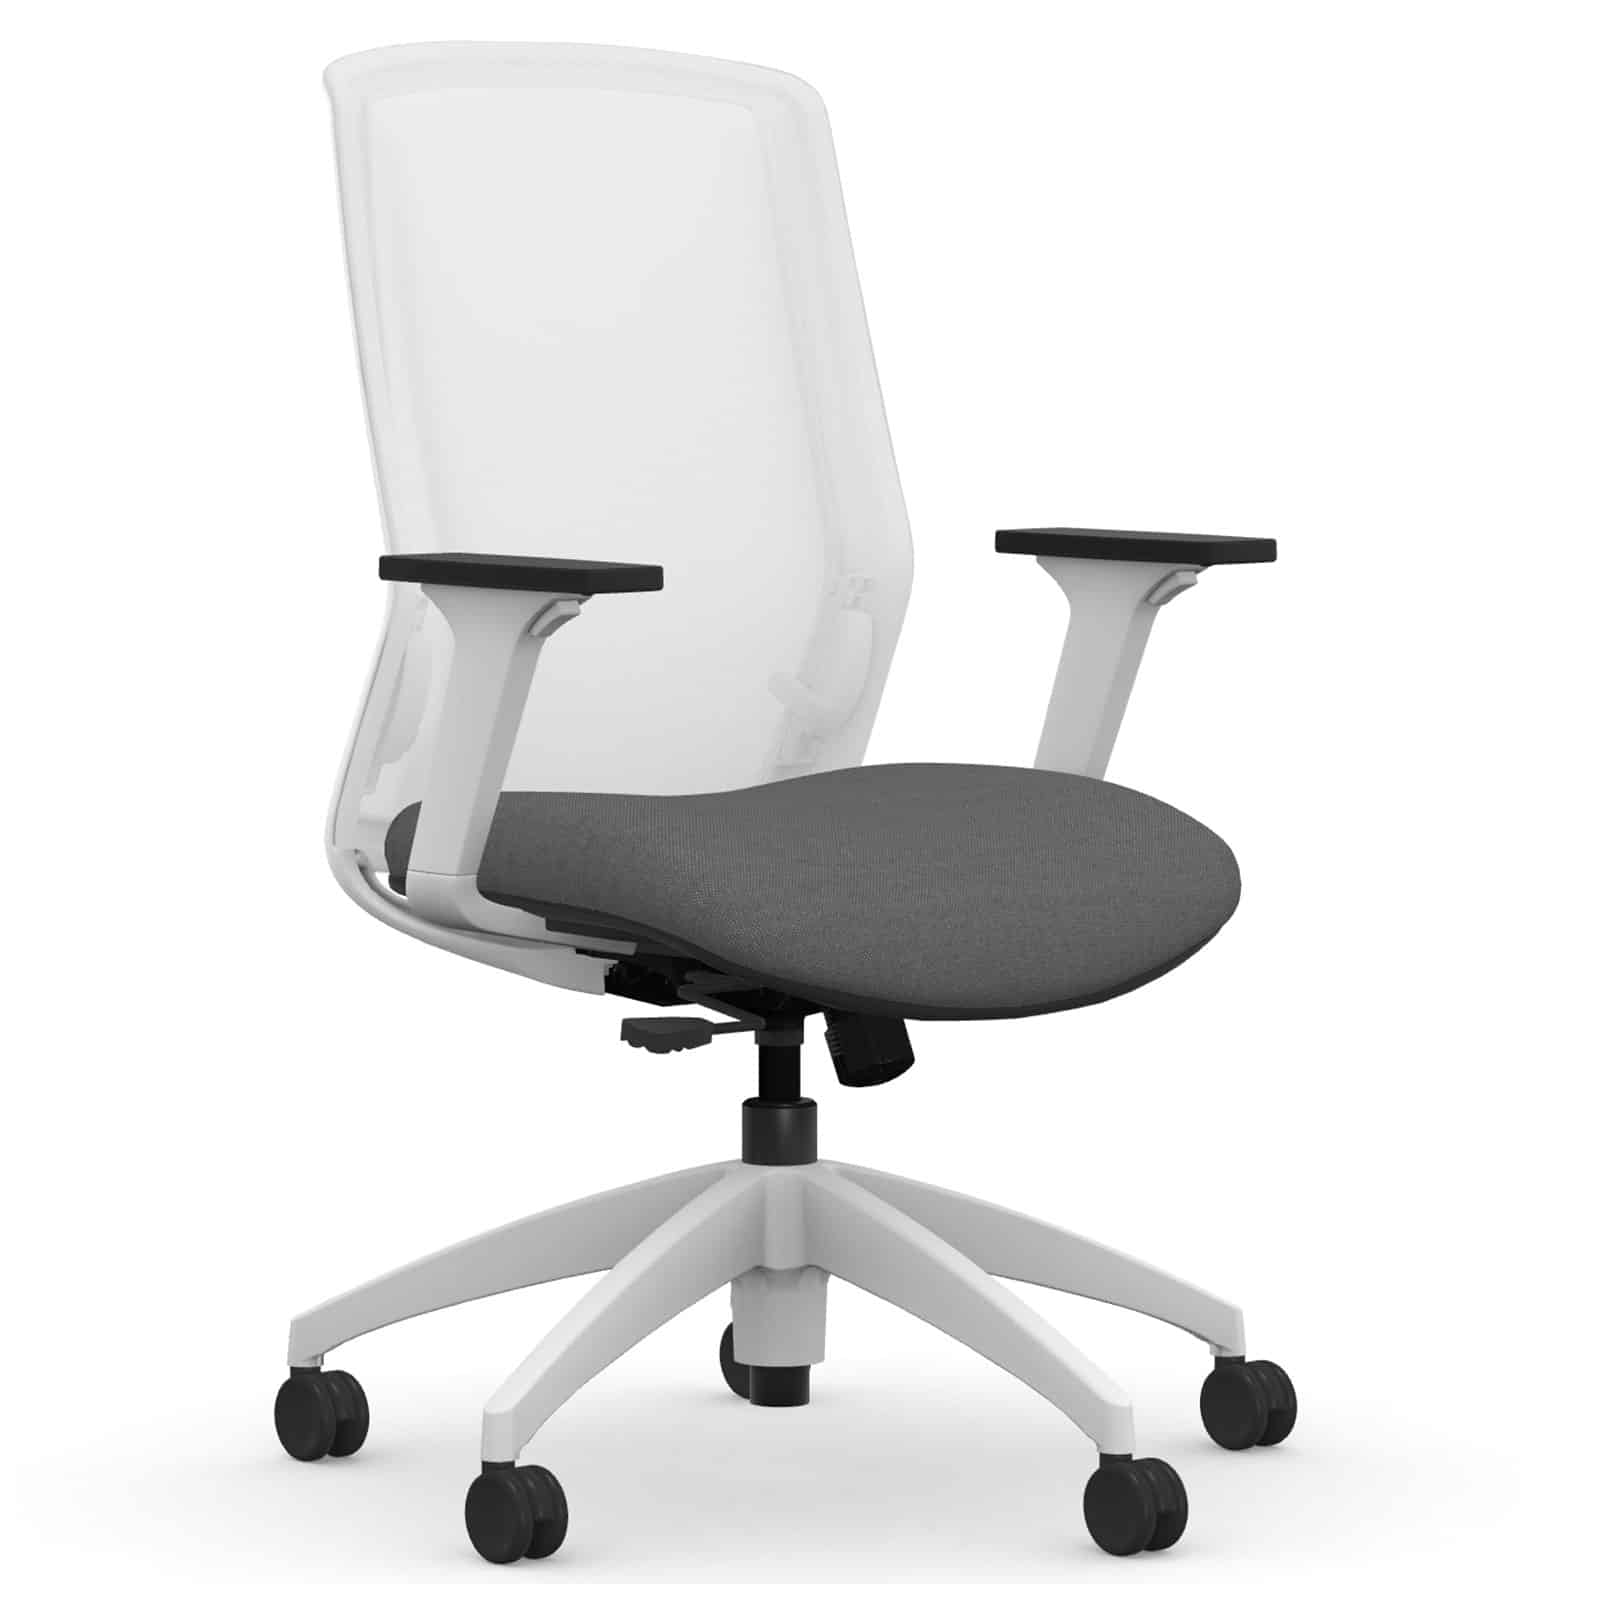 Neo Lite is sleek and contemporary, with a comfort molded foam seat and integrated adjustable lumbar support